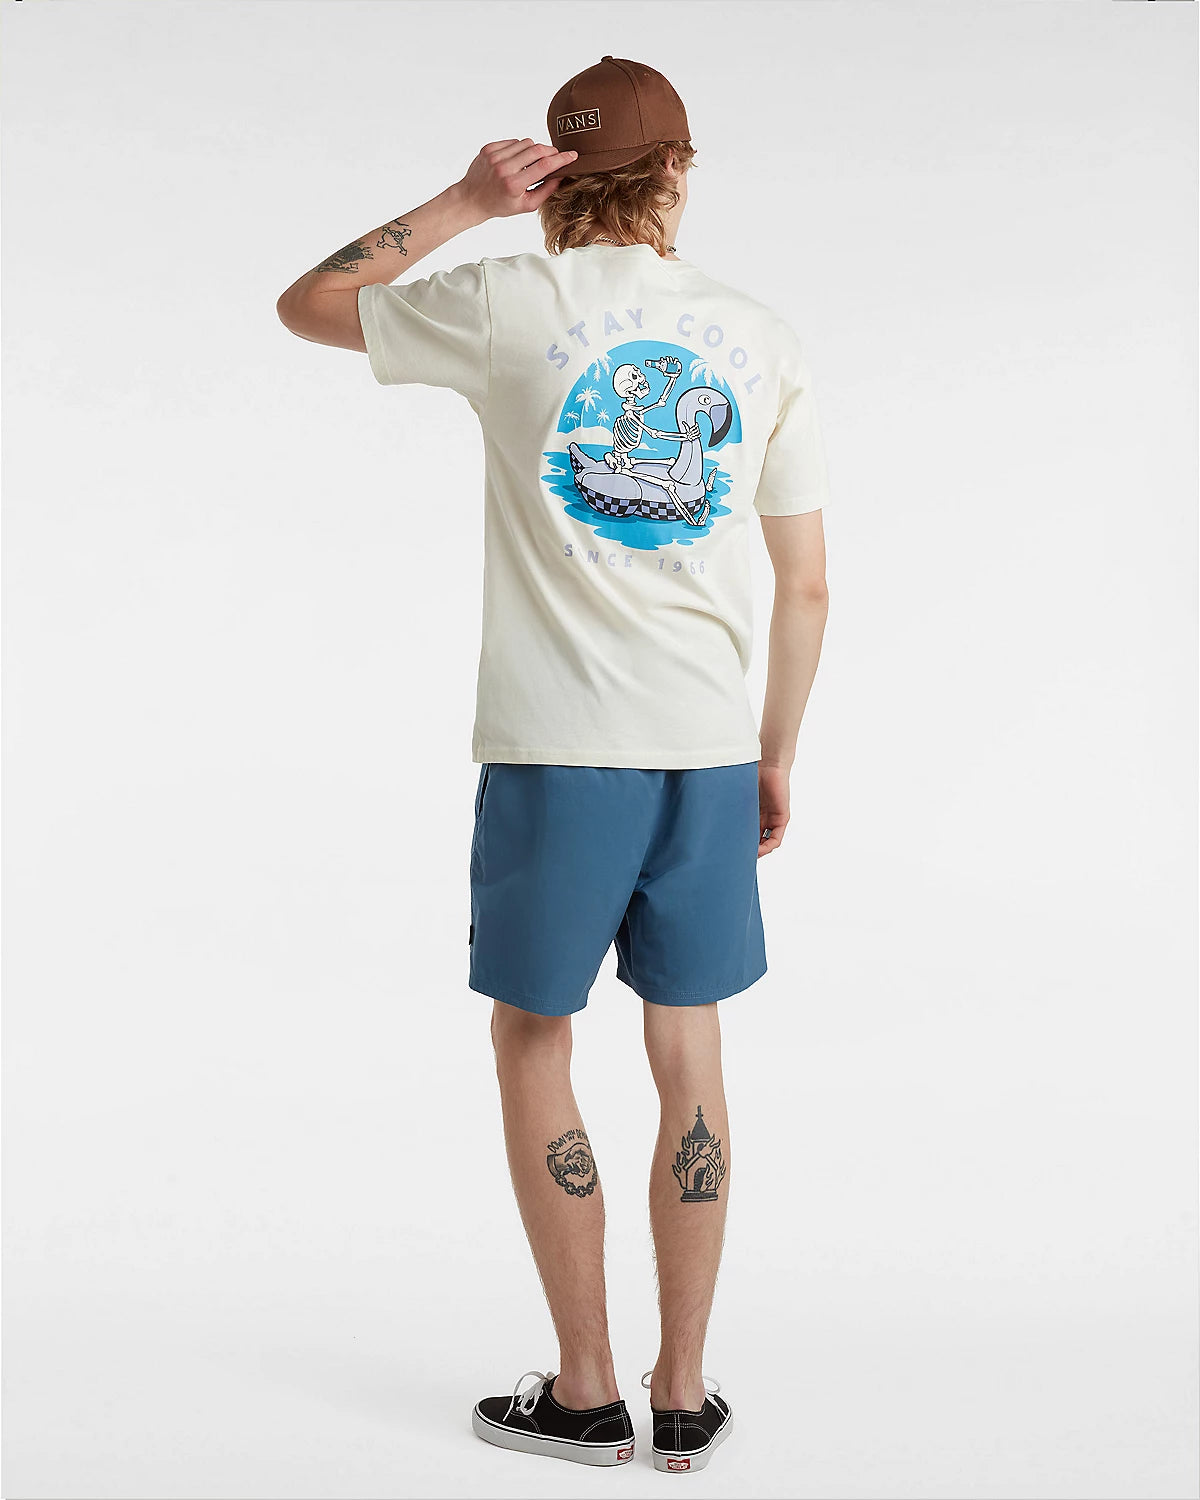 VANS STAY COOL SS TEE - Marshmalow